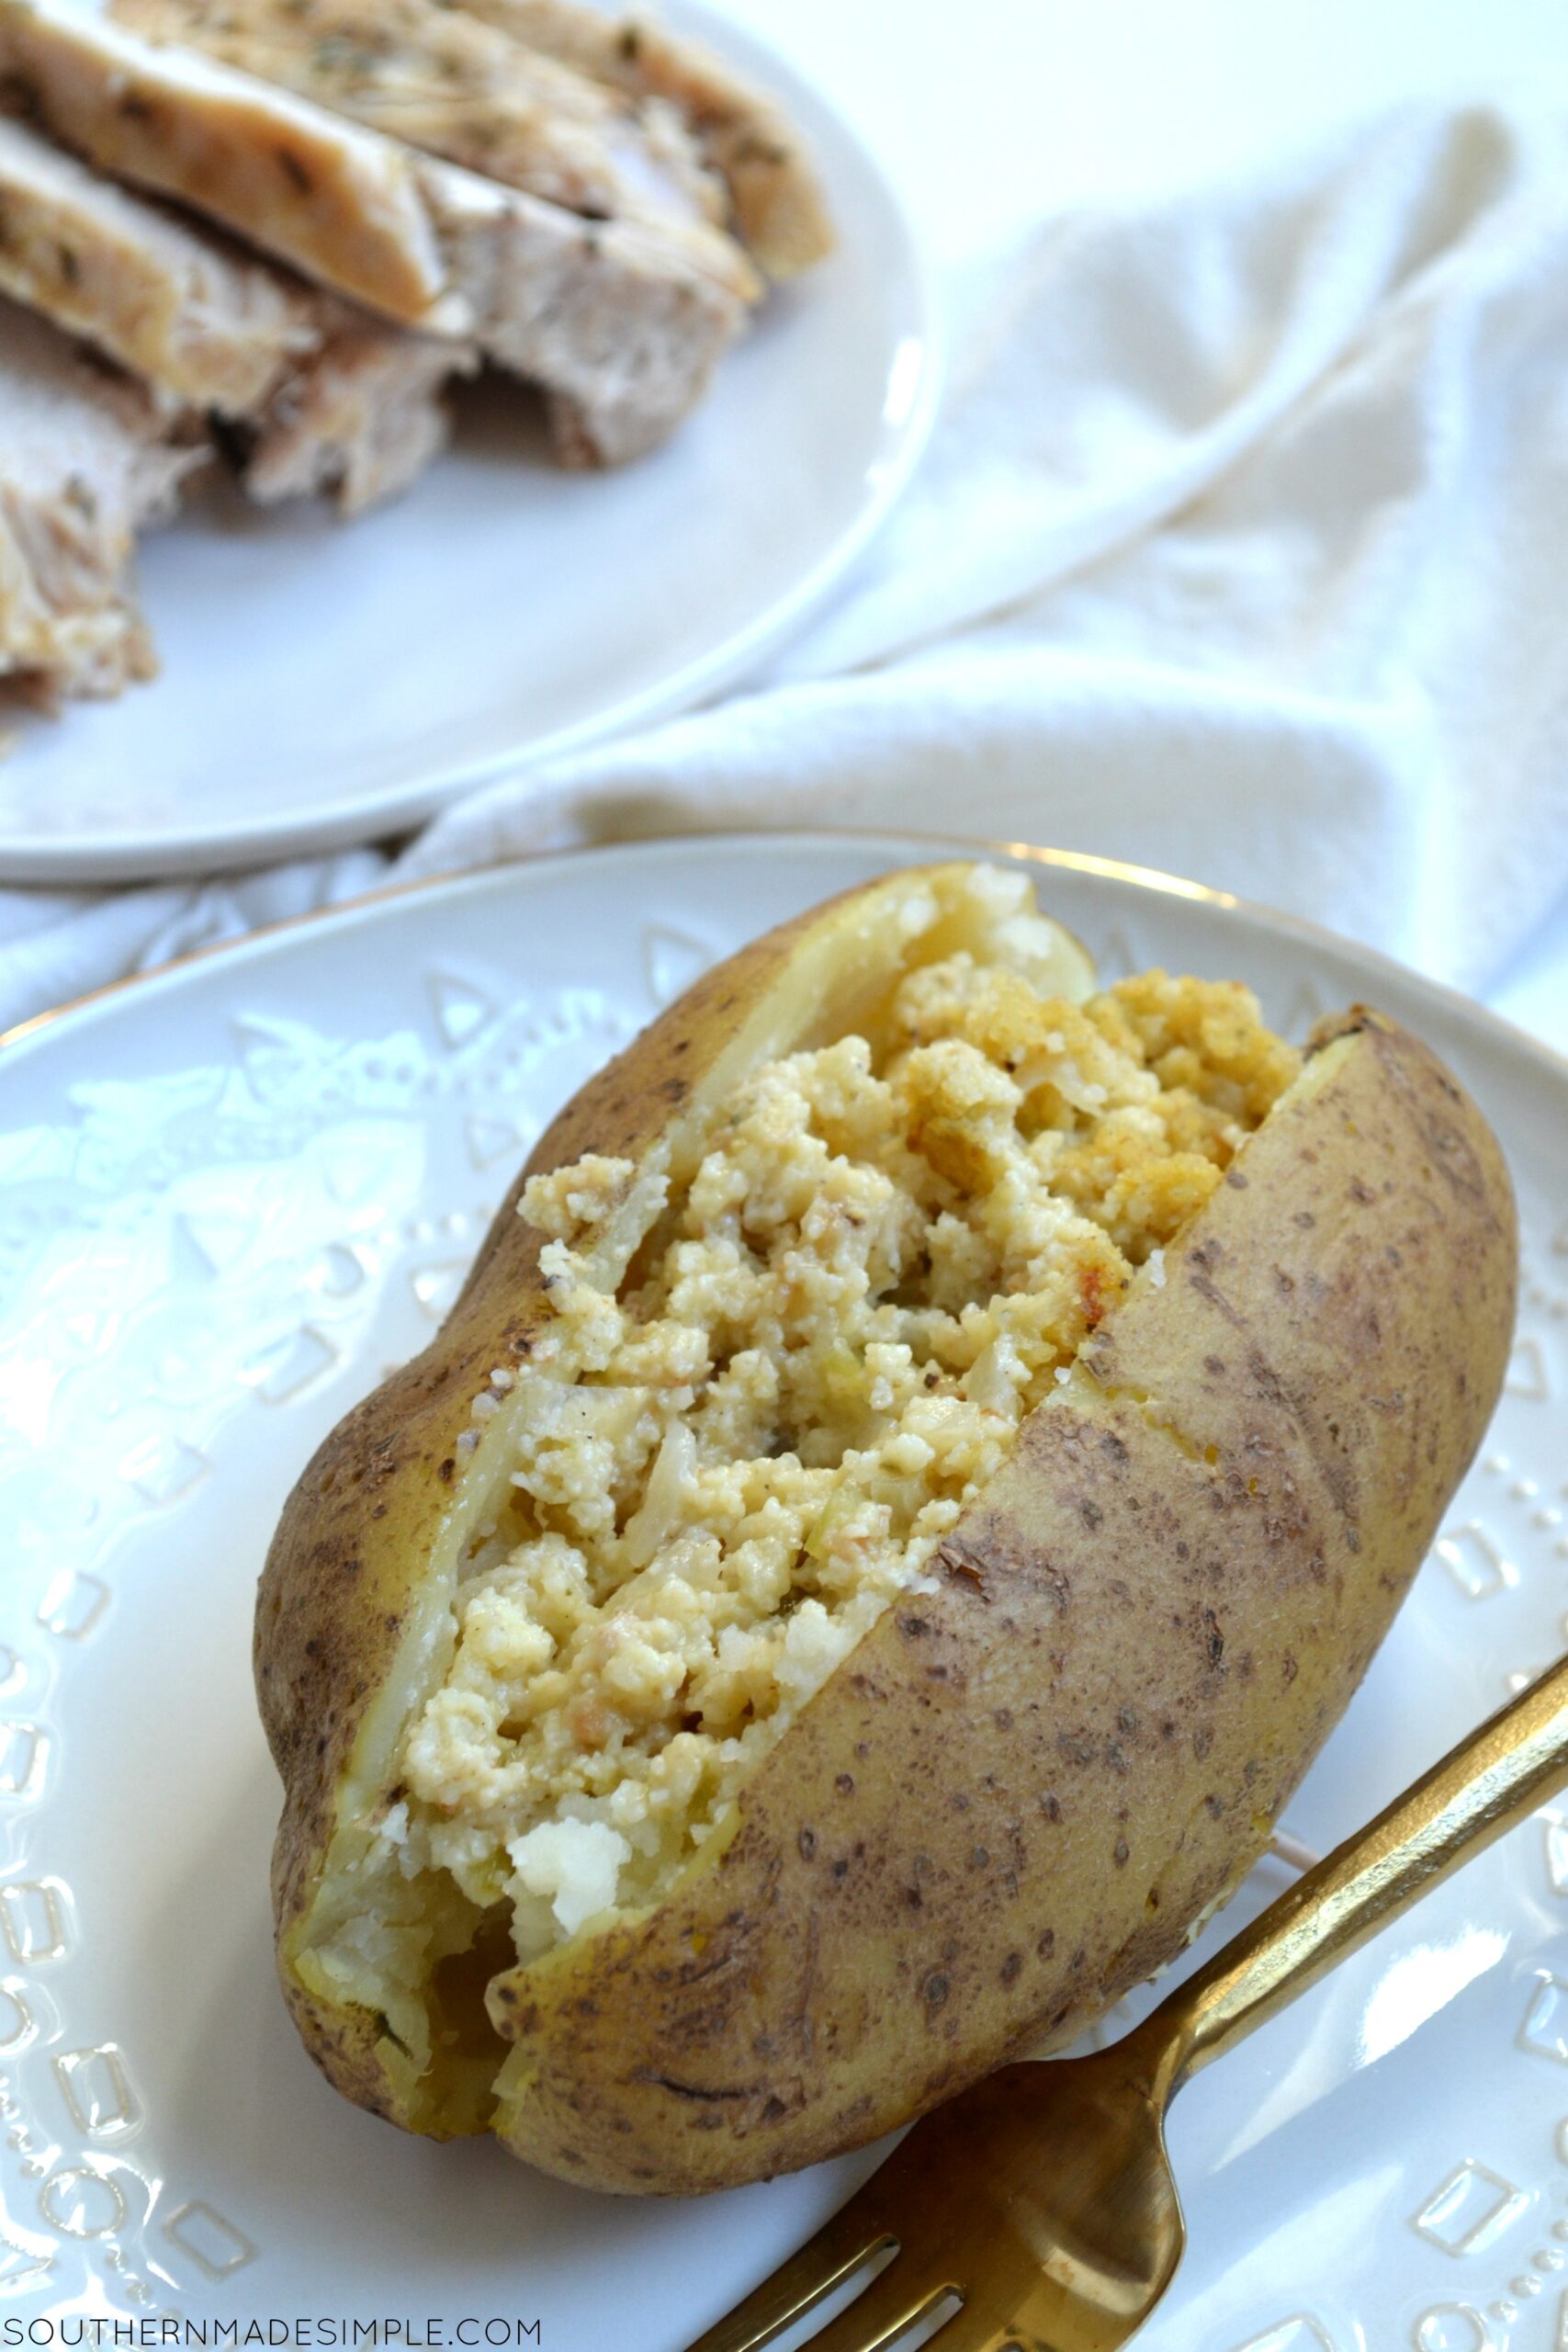 Comfort Food With A Twist: Loaded Turkey & Dressing Baked Potato